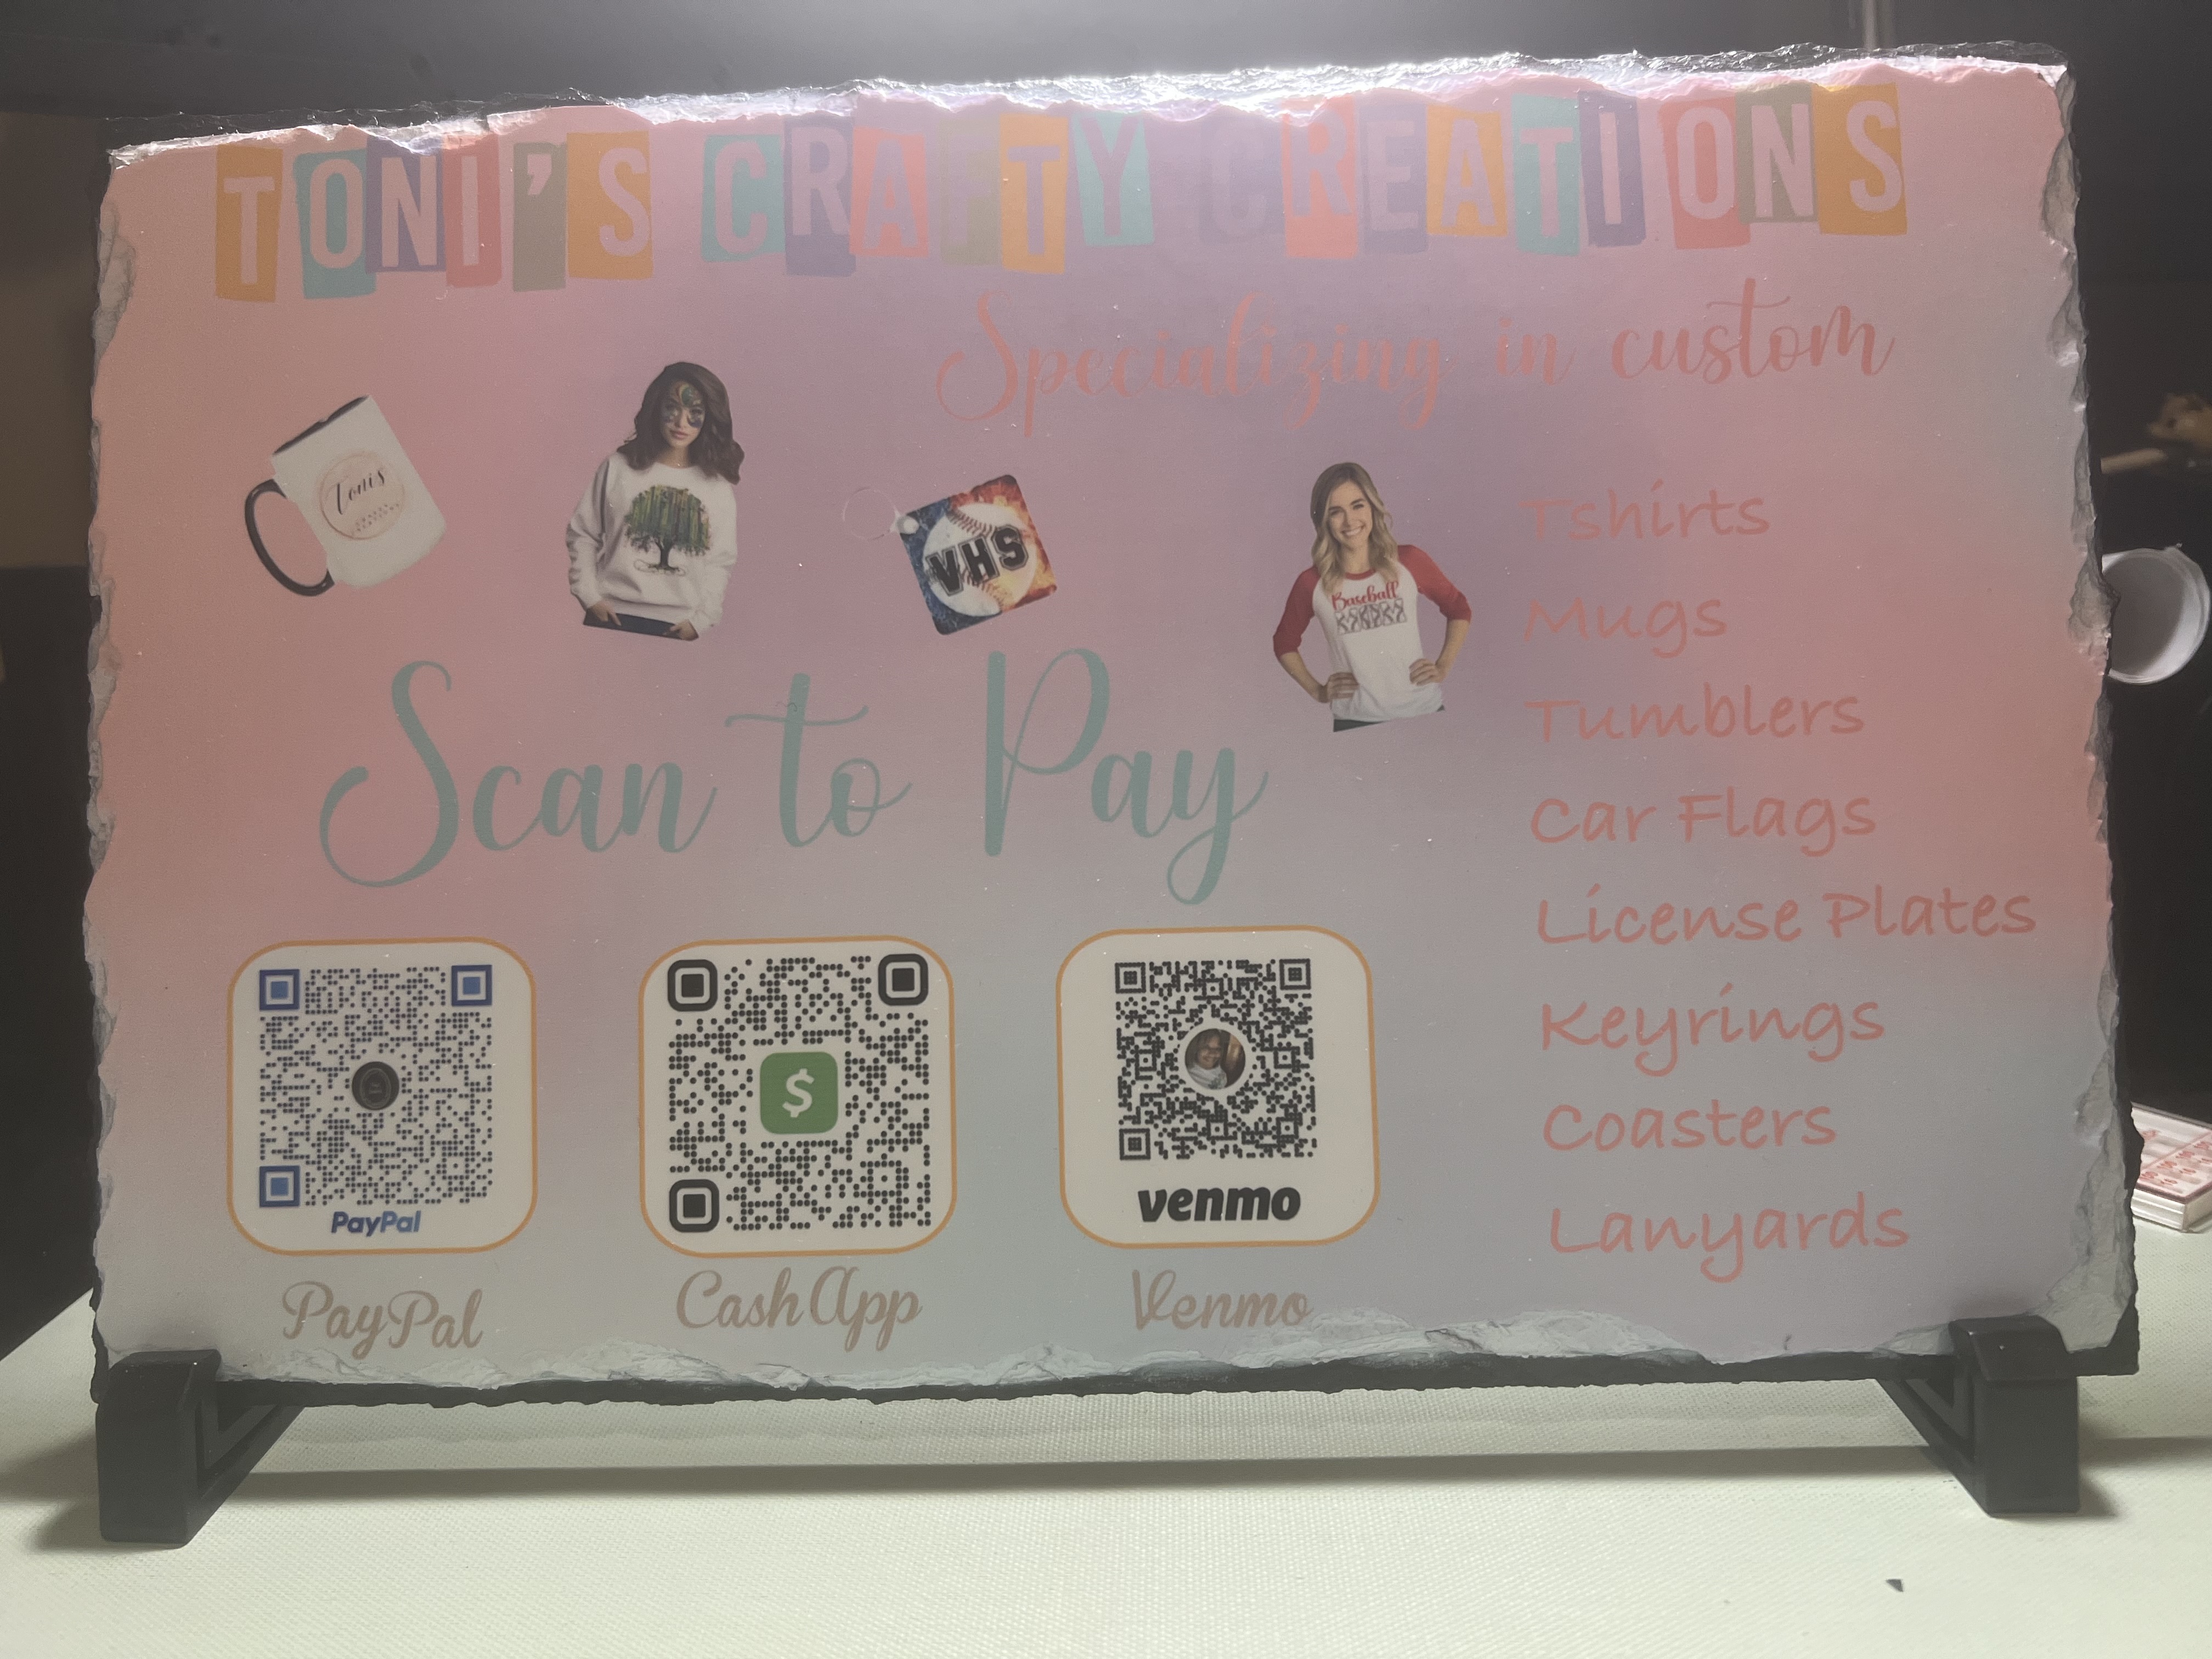 Pay station that could be used at events/pop up shops/craft shows for processing payments.